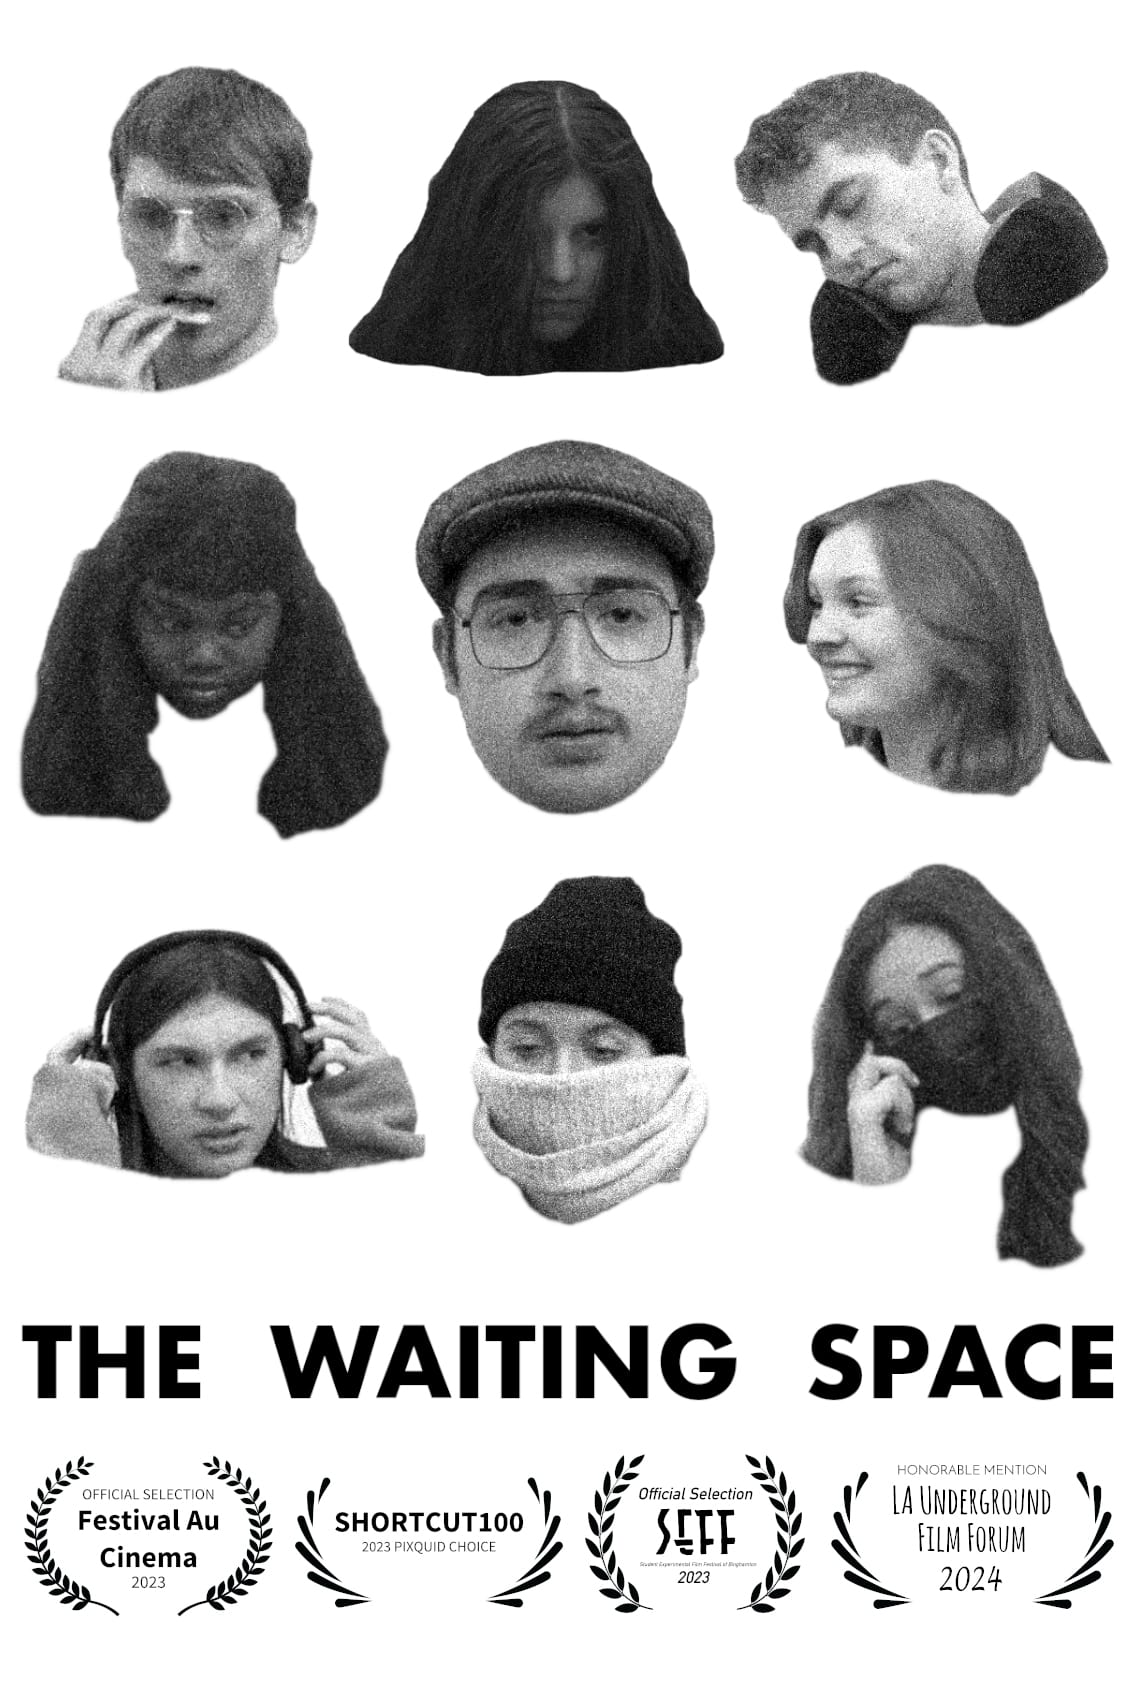 The Waiting Space